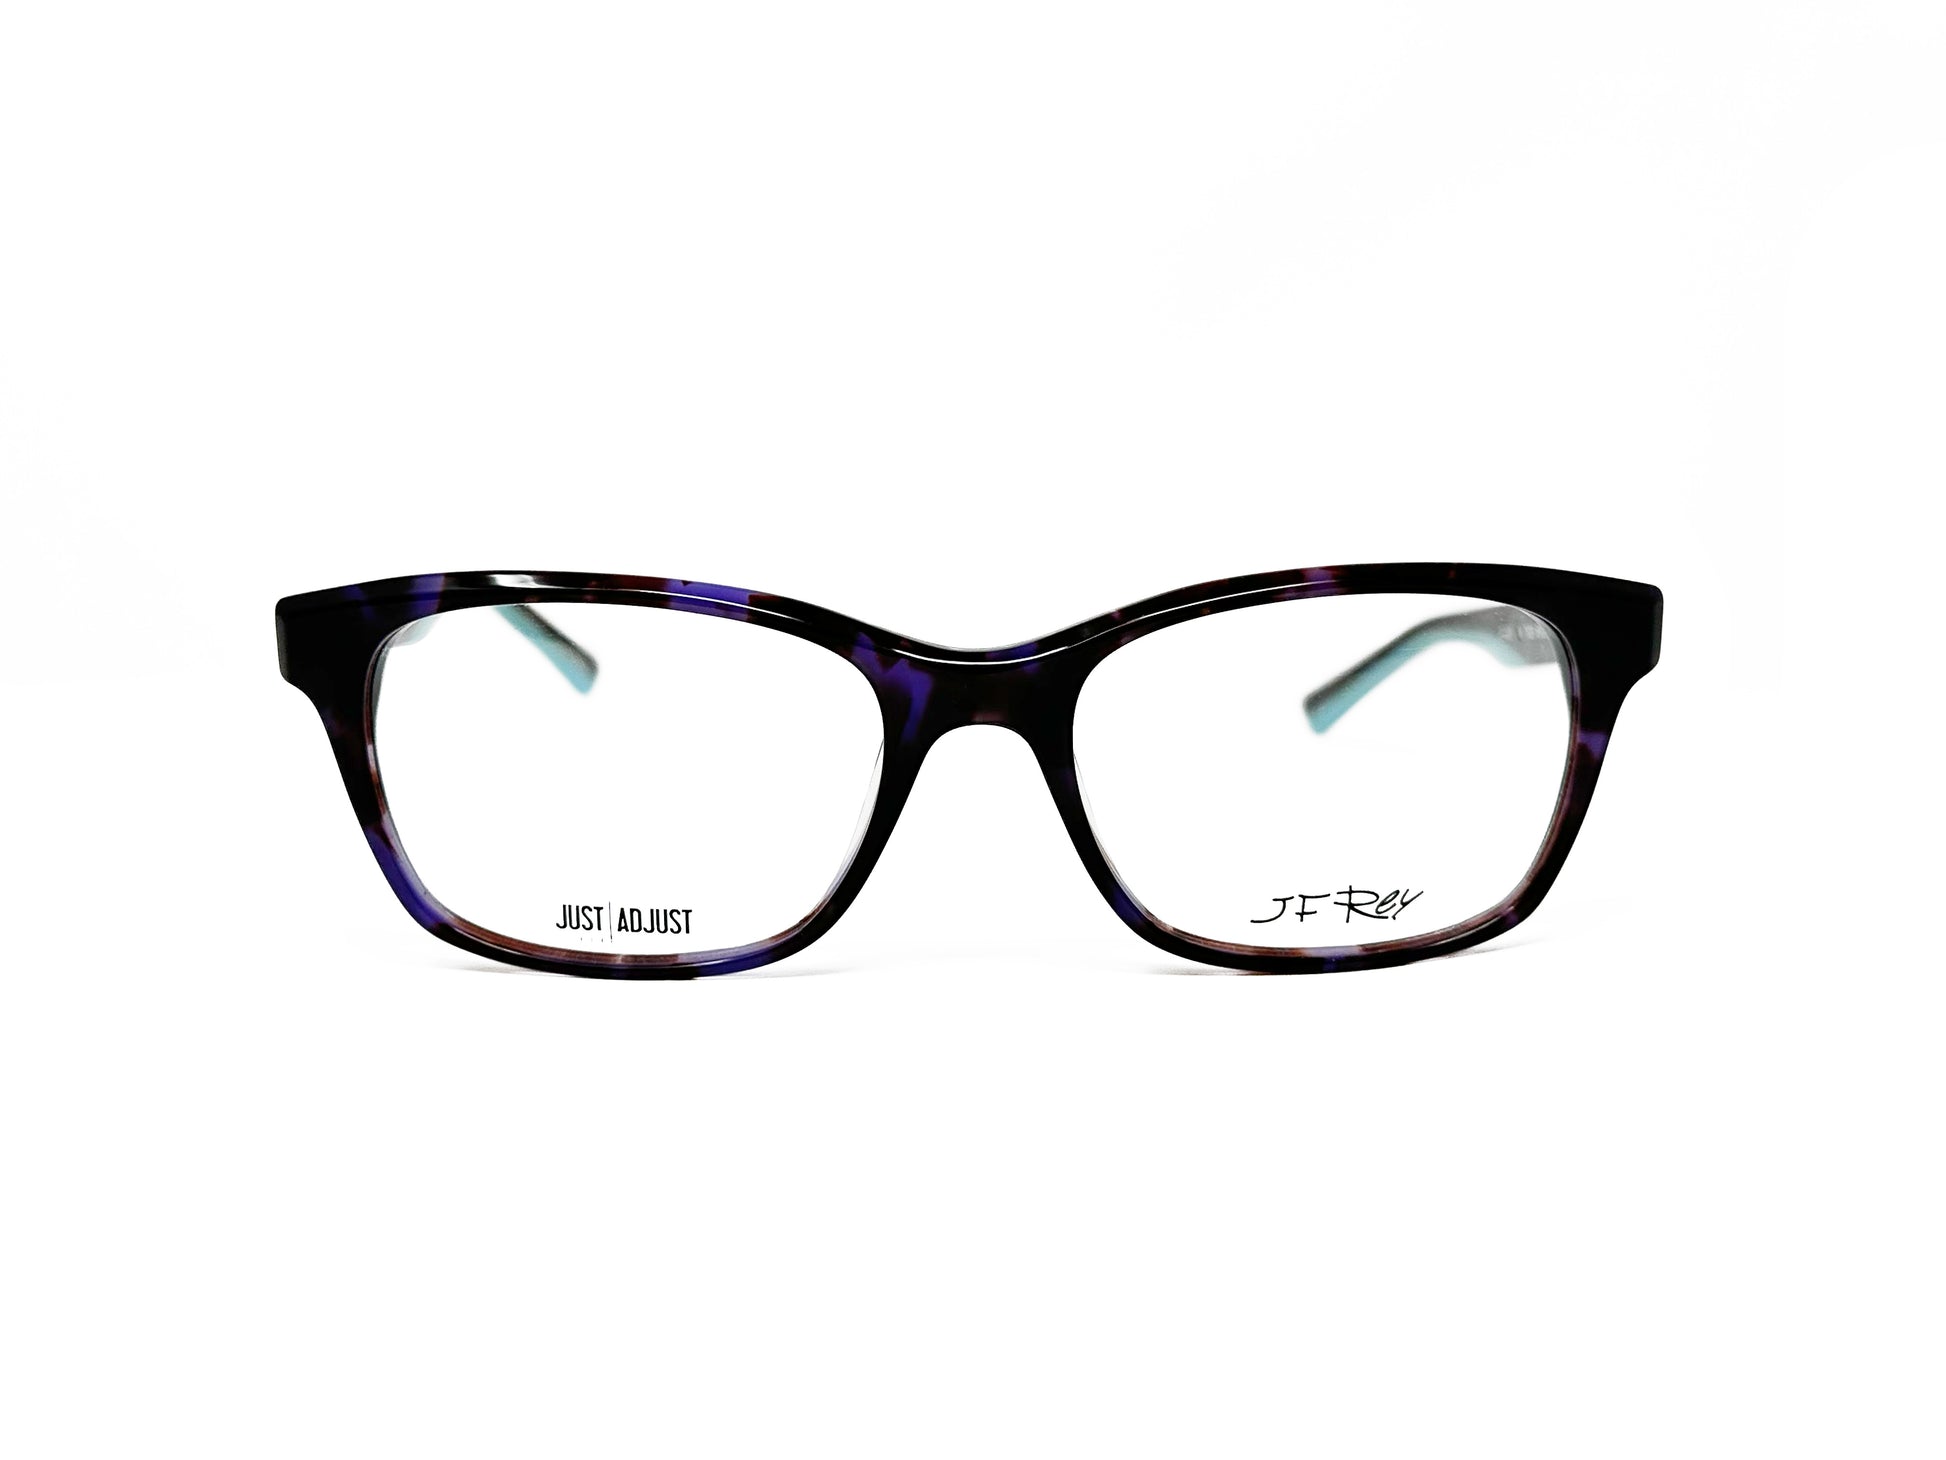 JF Rey rectangular, acetate optical frame. Model: JF1320. COlor: 7520 - Dark purple tortoise with teal accents on temples. Front view. 